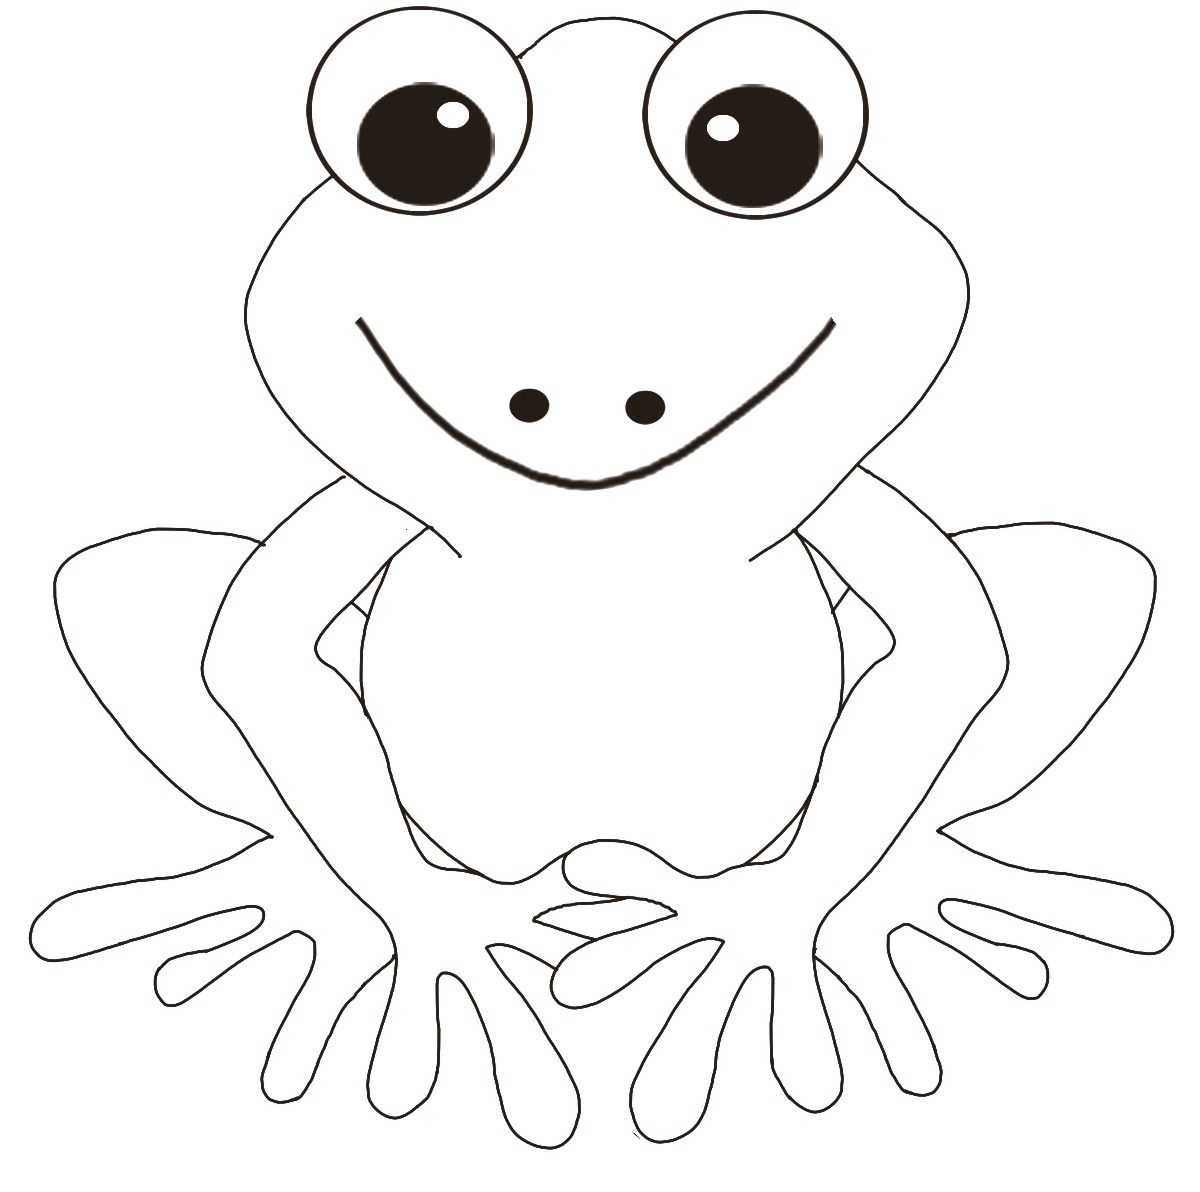 Fun toad coloring book for kids